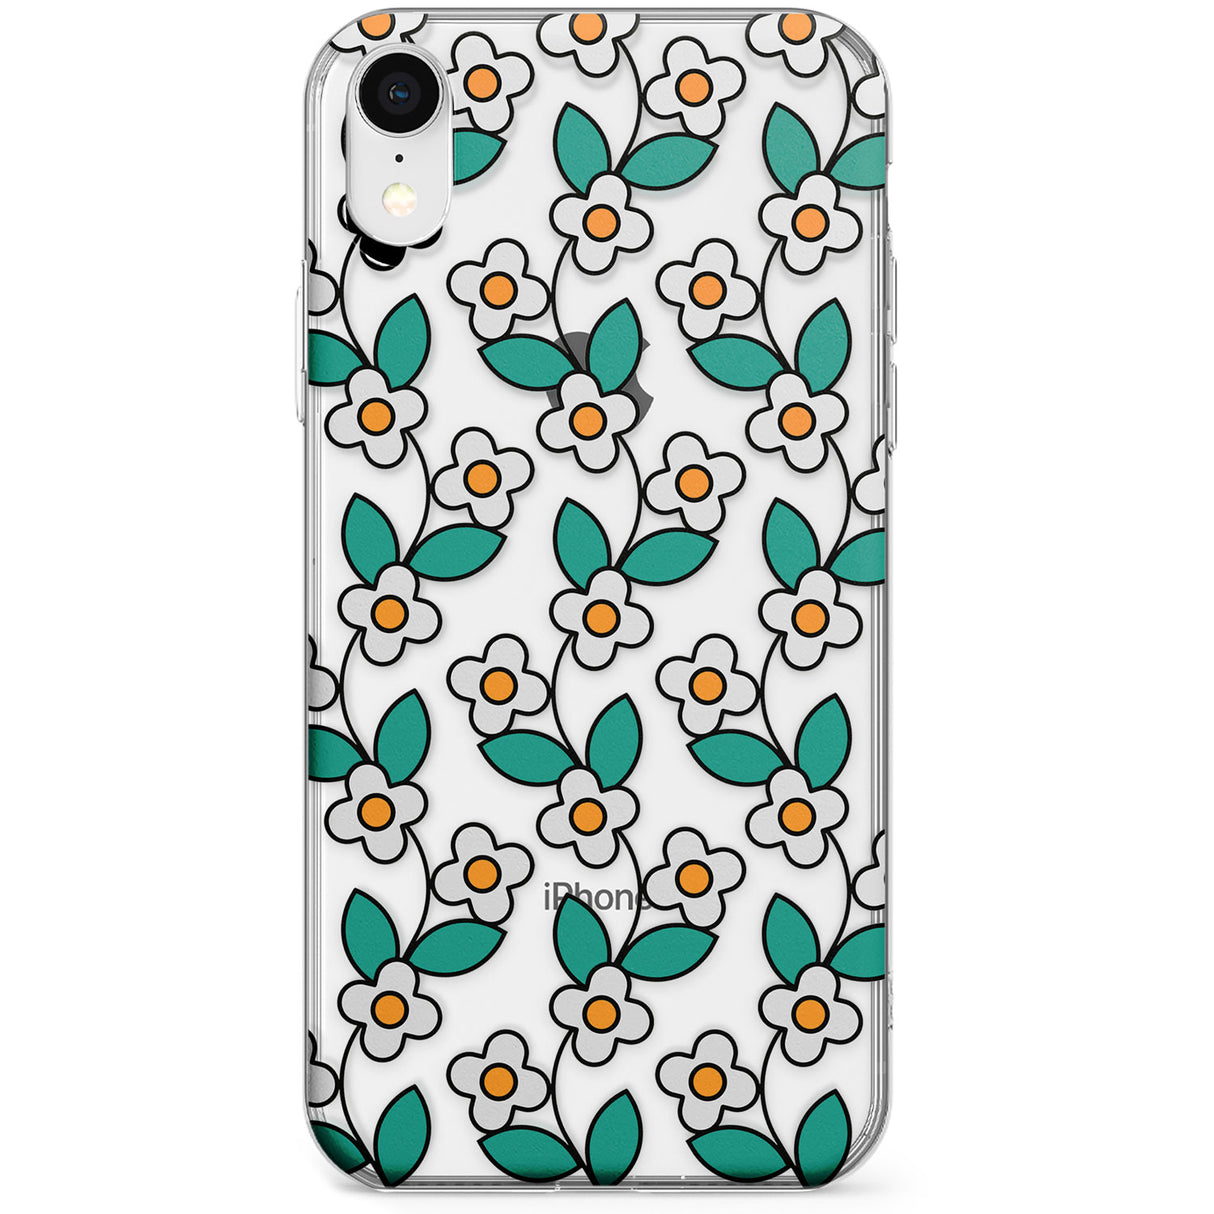 Spring Daisies Phone Case for iPhone X, XS Max, XR